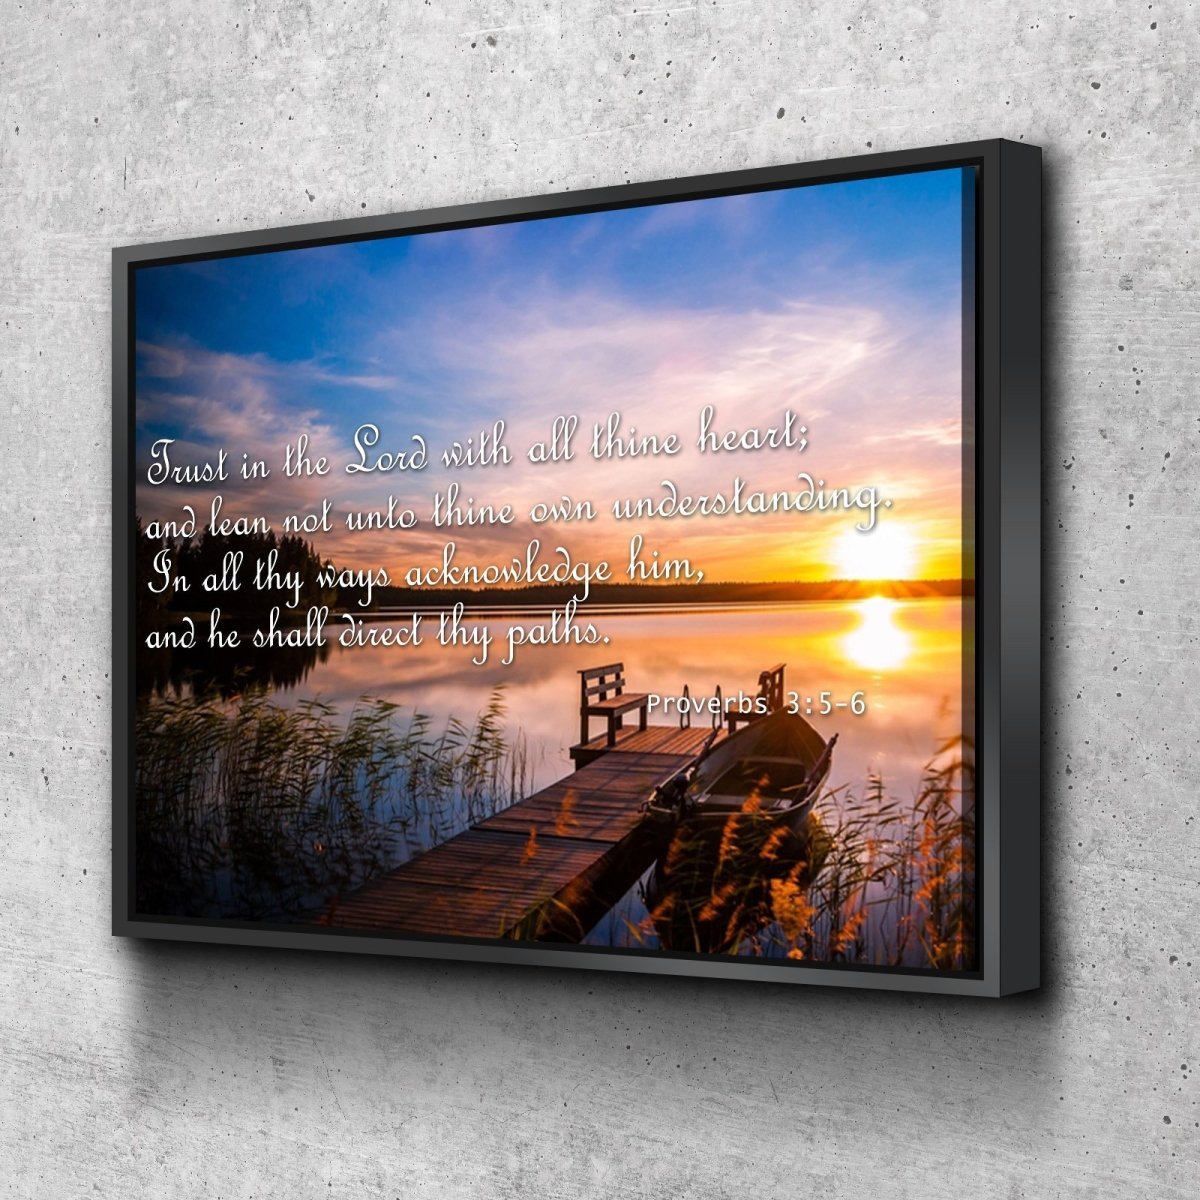 Proverbs 35-6 #15 Kjv 'Trust In The Lord' Christian Scripture Wall Art Canvas - Christian Canvas Wall Art